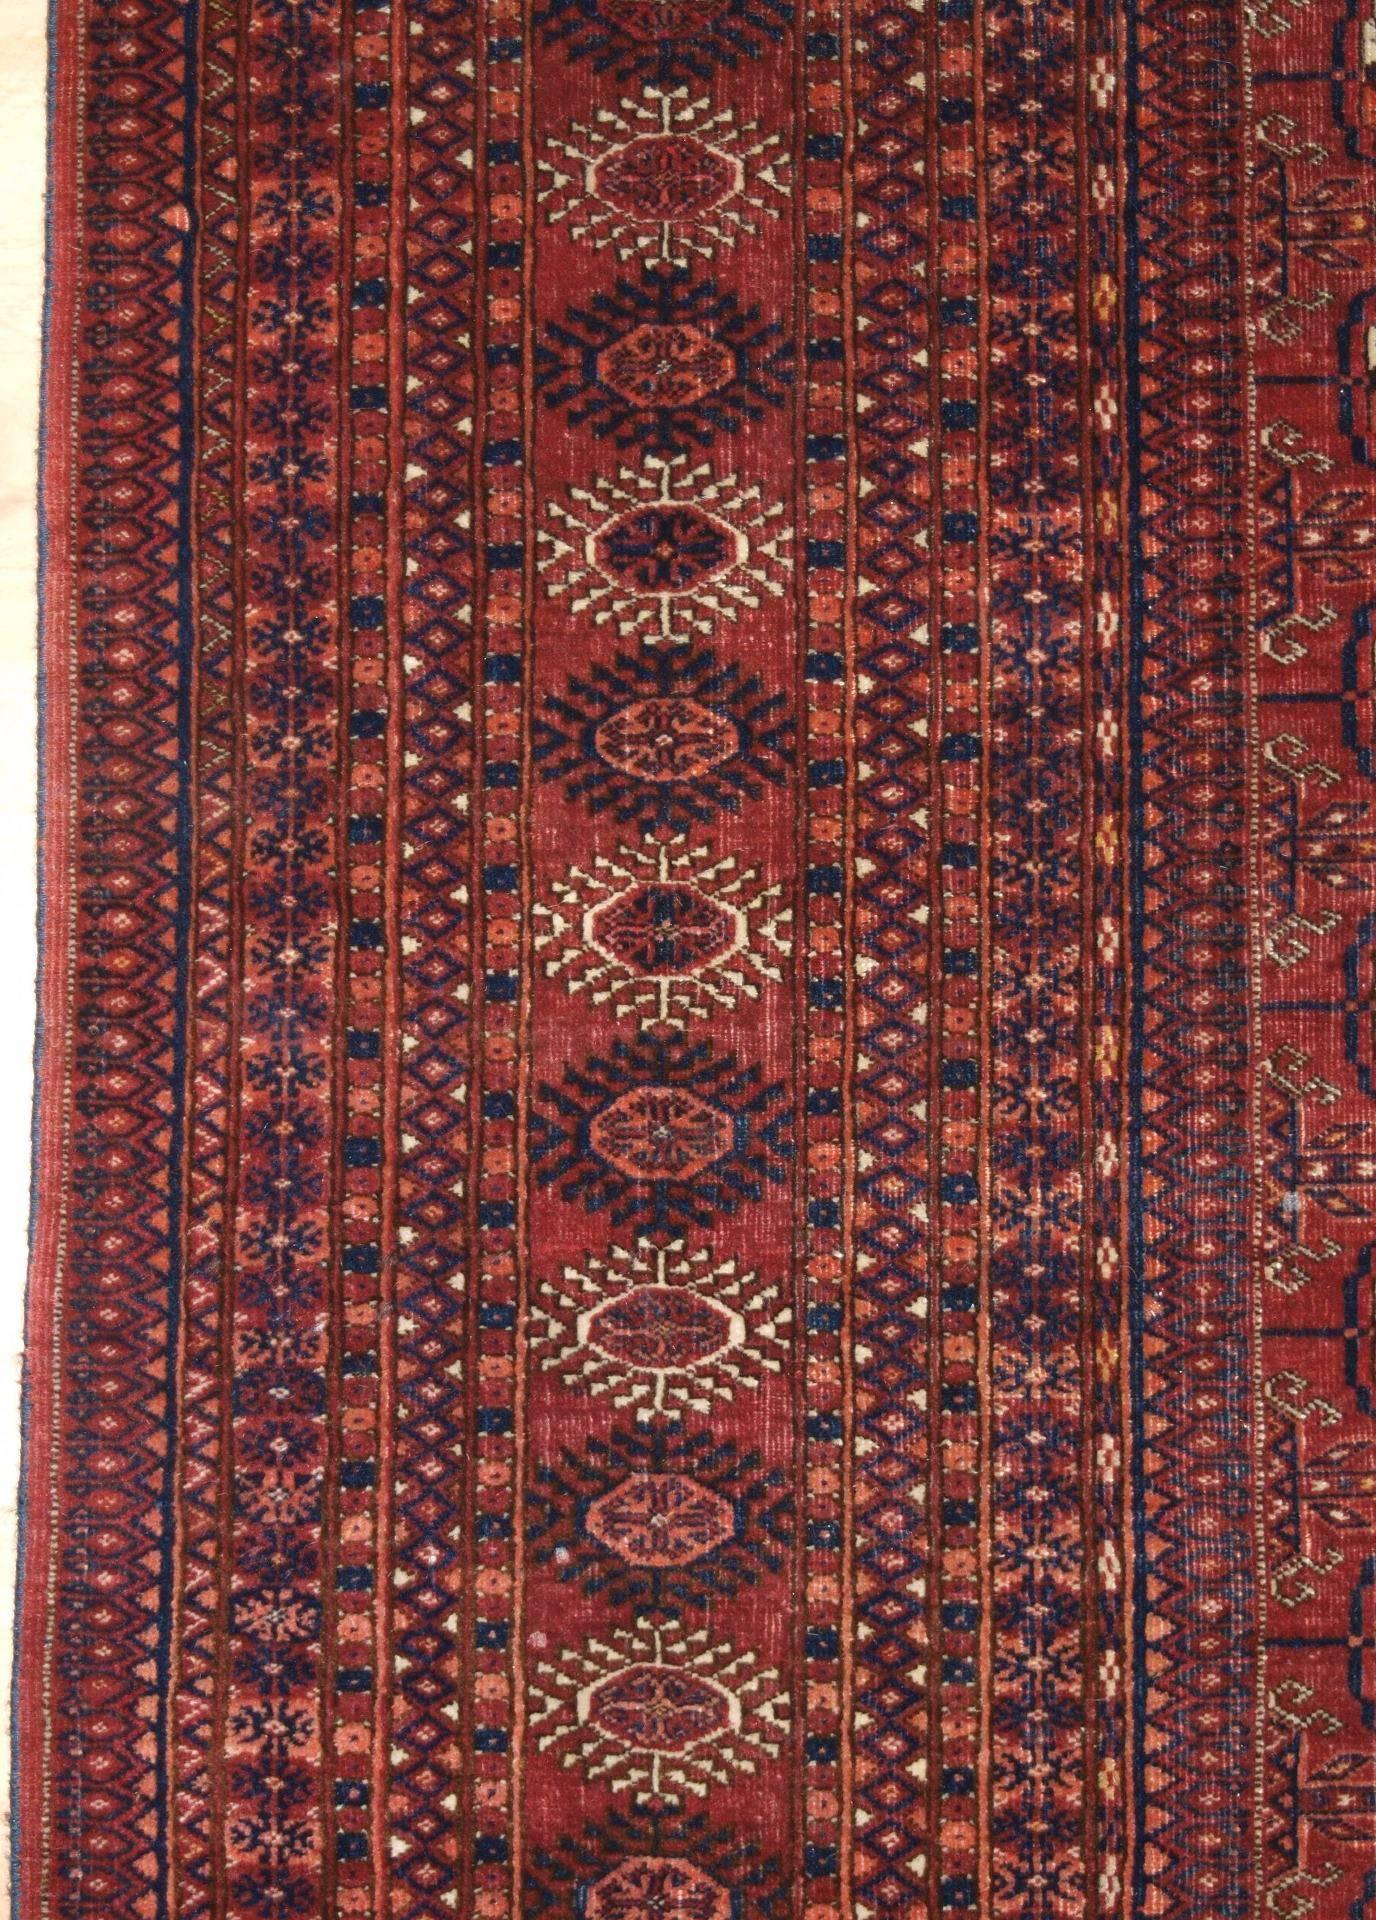 Antique Tekke Turkmen Rug of Excellent Design and Color, circa 1900 In Excellent Condition For Sale In Moreton-in-Marsh, GB